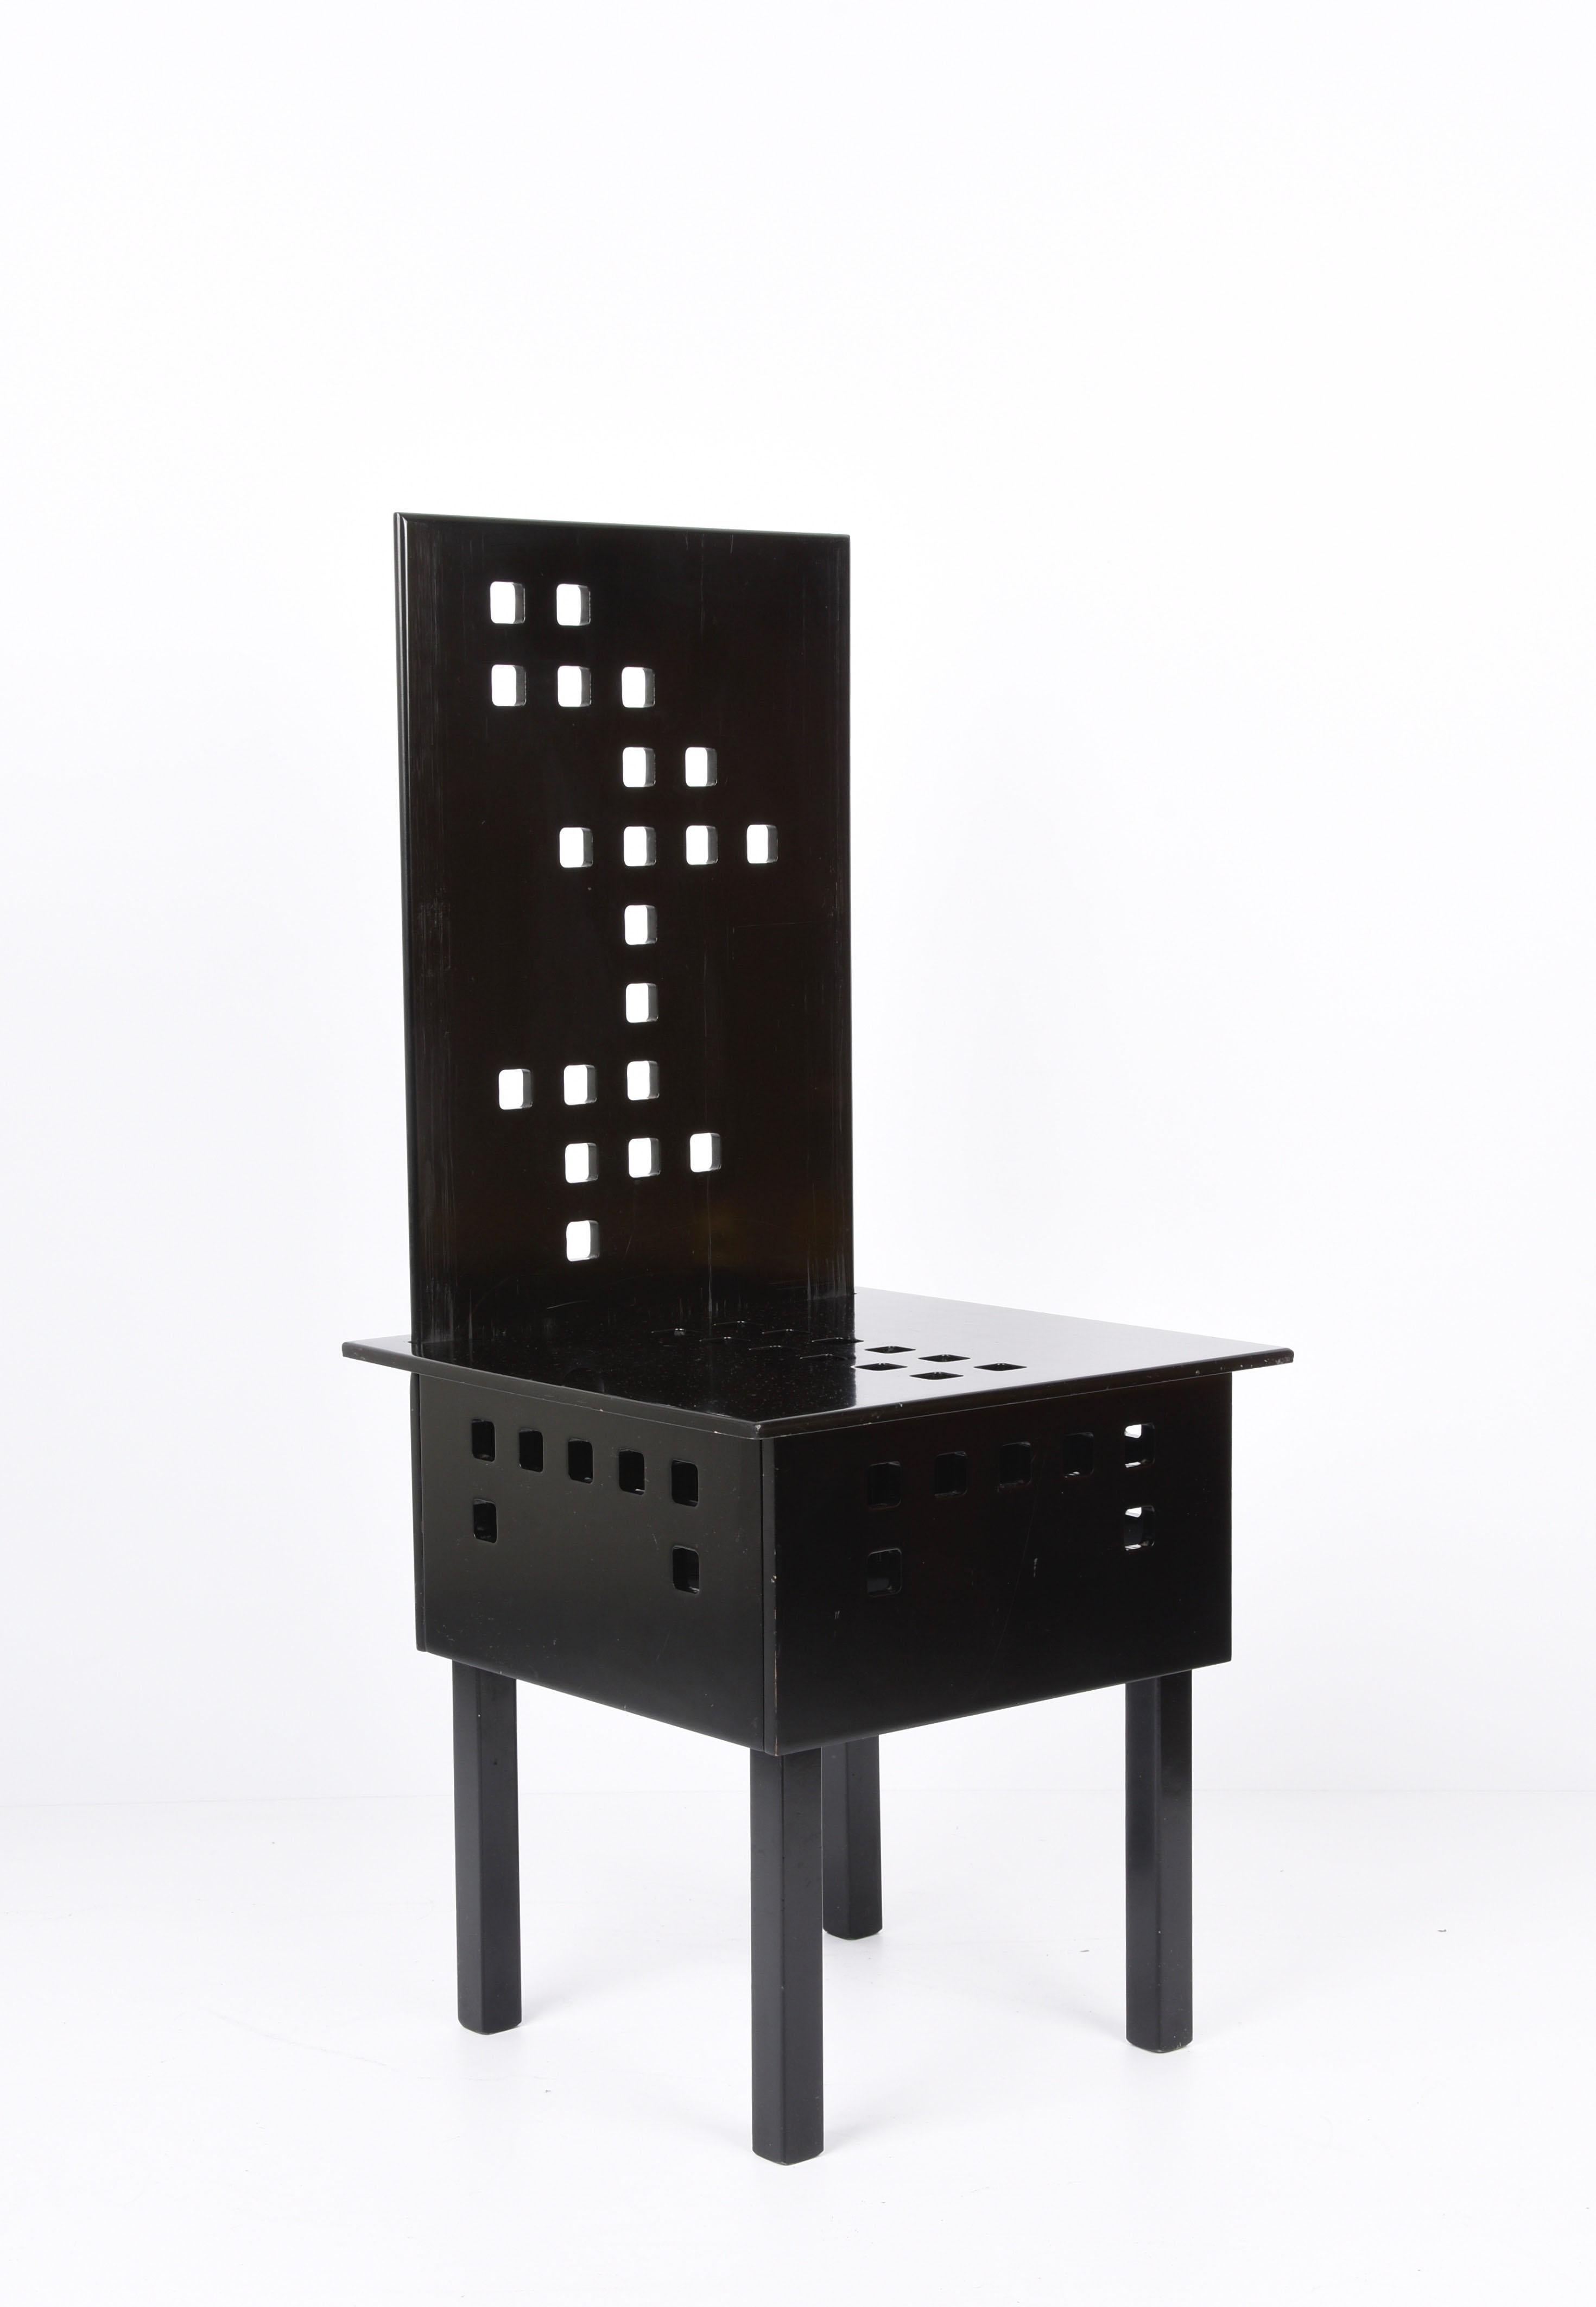 Late 20th Century Midcentury Lacquered Black Ash Wood Chair after Charles Rennie Mackintosh, 1980s